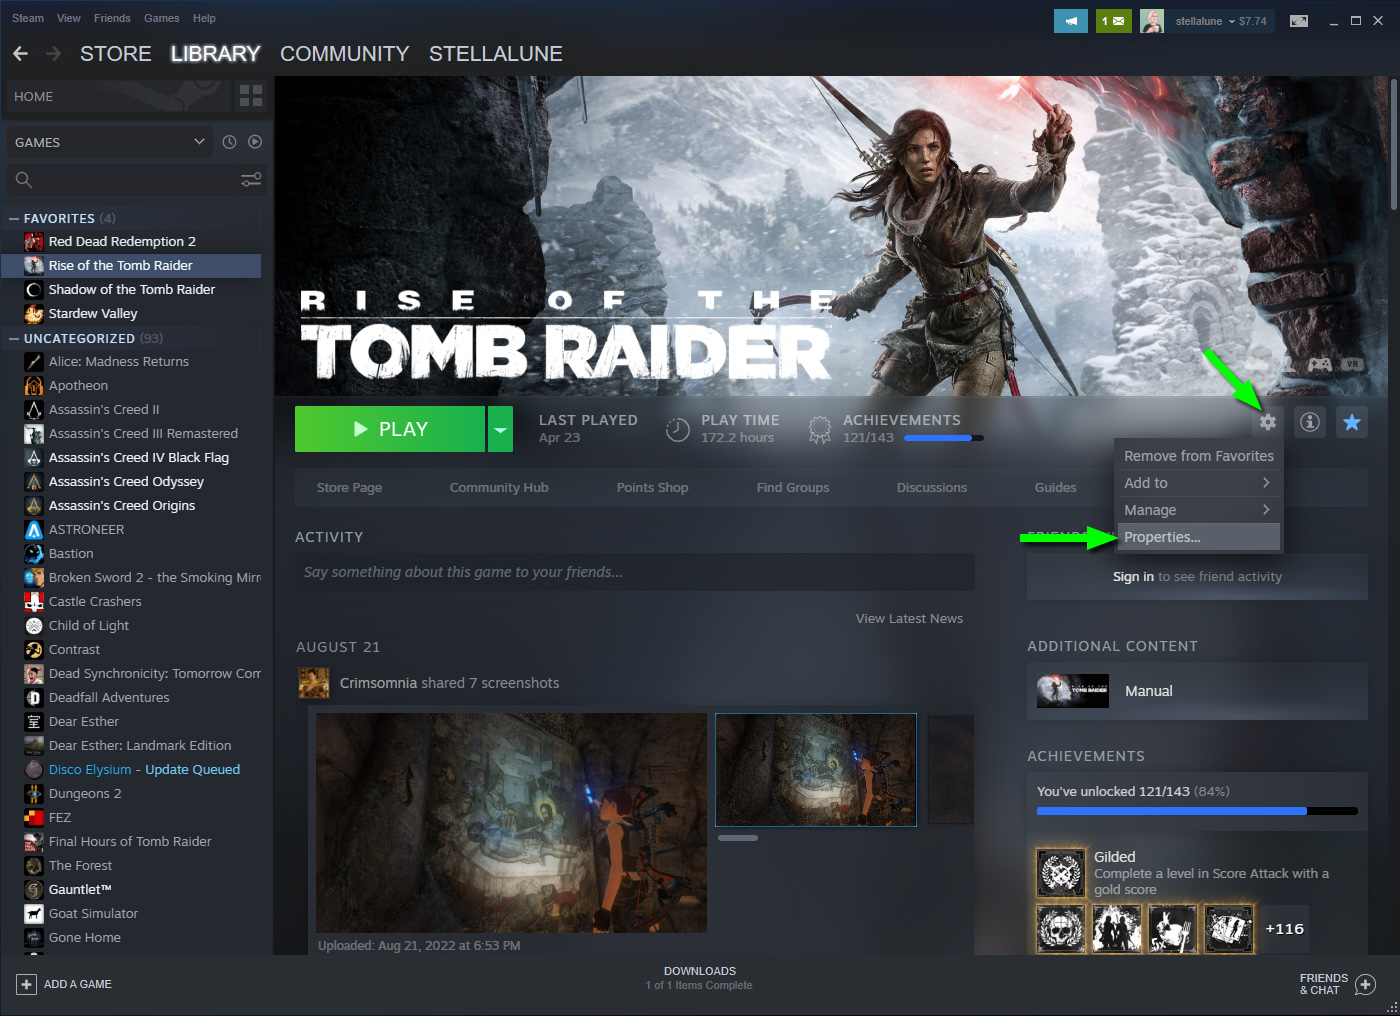 How to Download and Install Rise of the Tomb Raider Save Files.